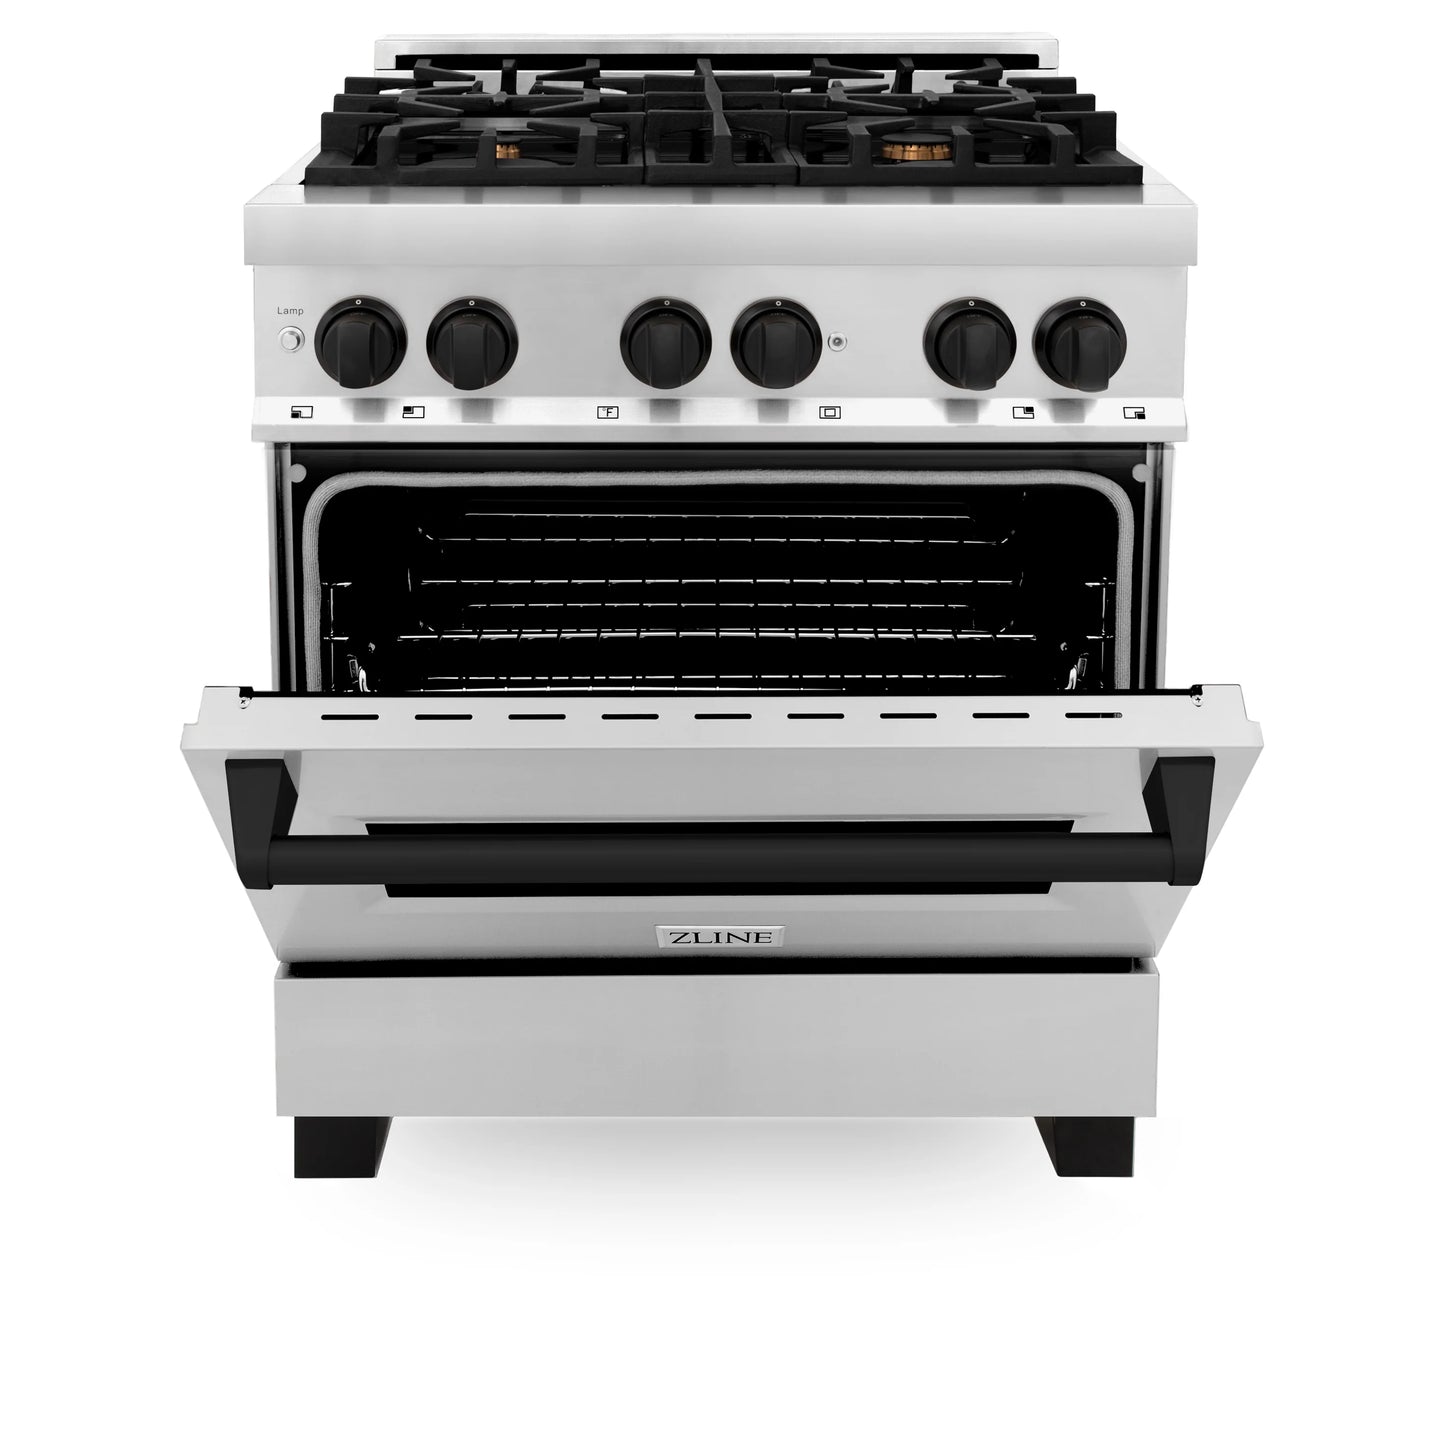 ZLINE Autograph Edition 30 in. Dual Fuel Range with Gas Stove and Electric Oven in Stainless Steel with Matte Black Accents (RAZ-30-MB)